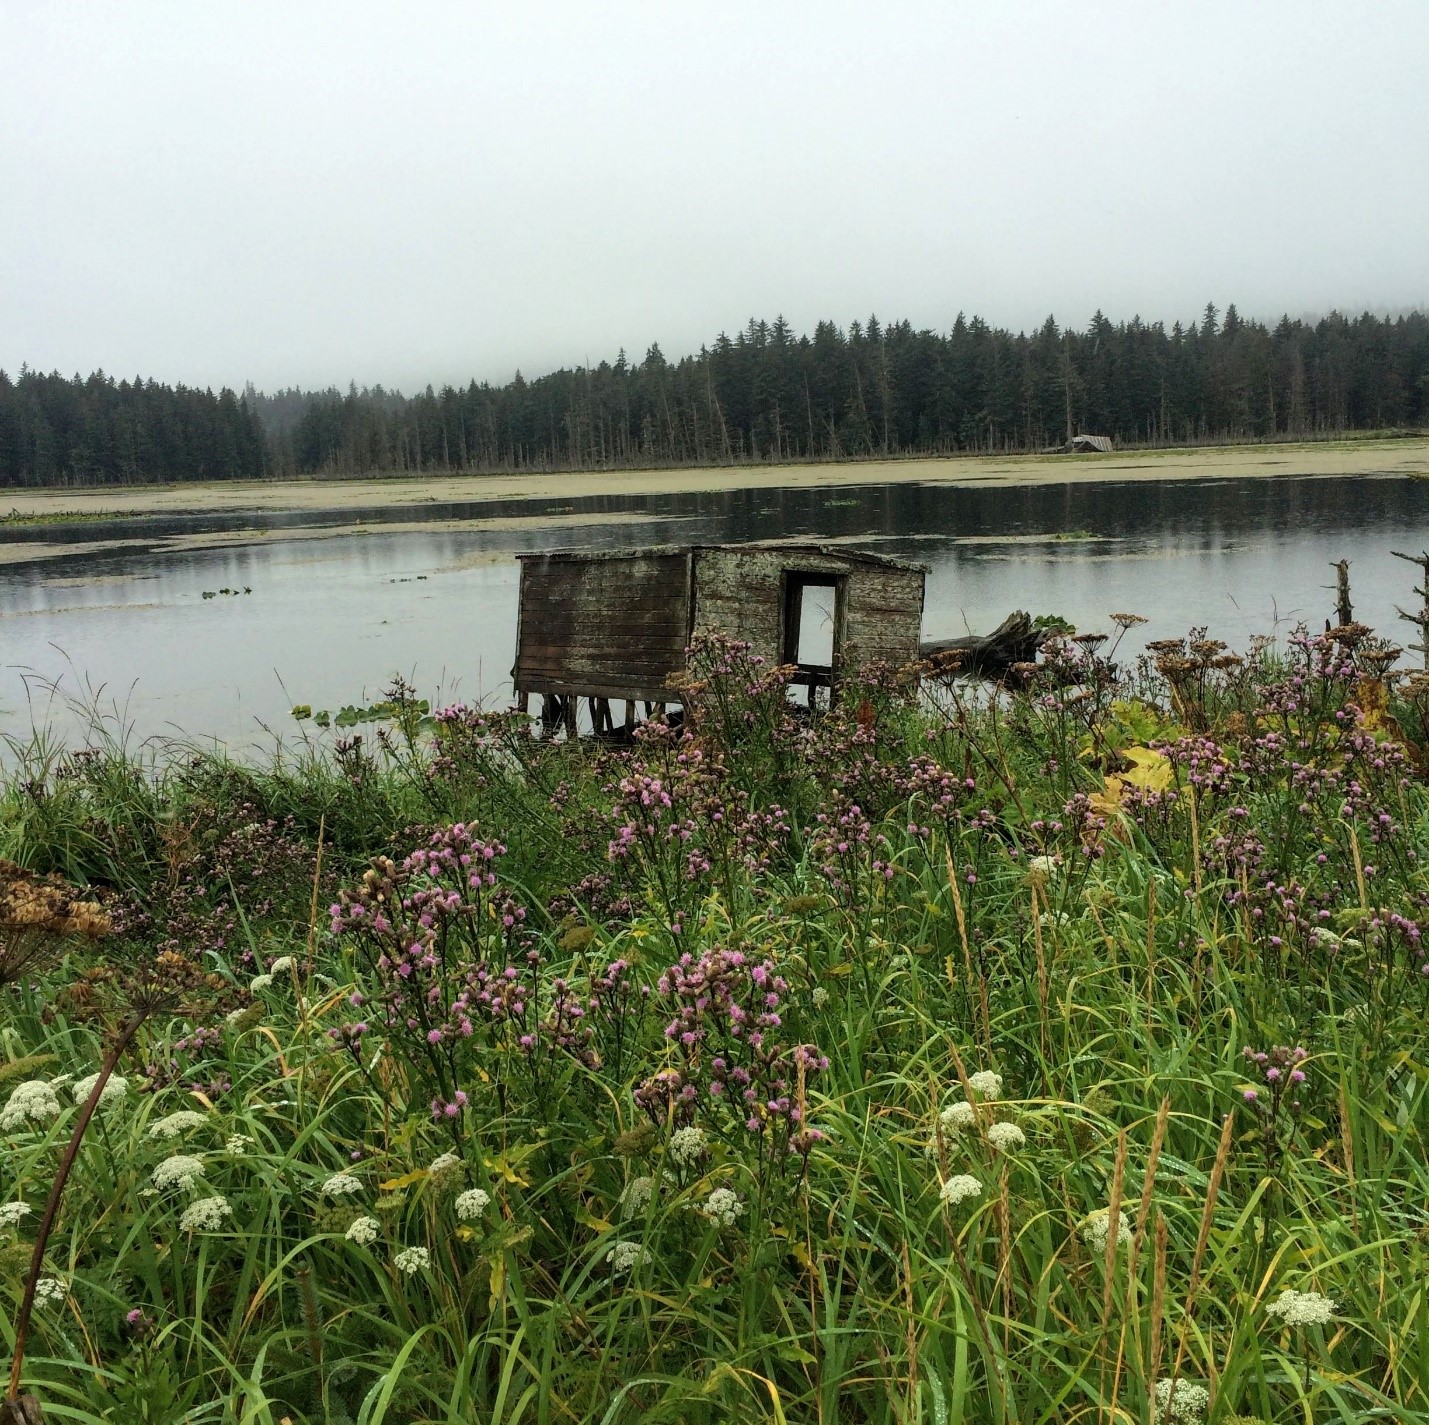 Is a Lack of Data the Reason for Alaska’s Lack of Environmental Justice Legislation?